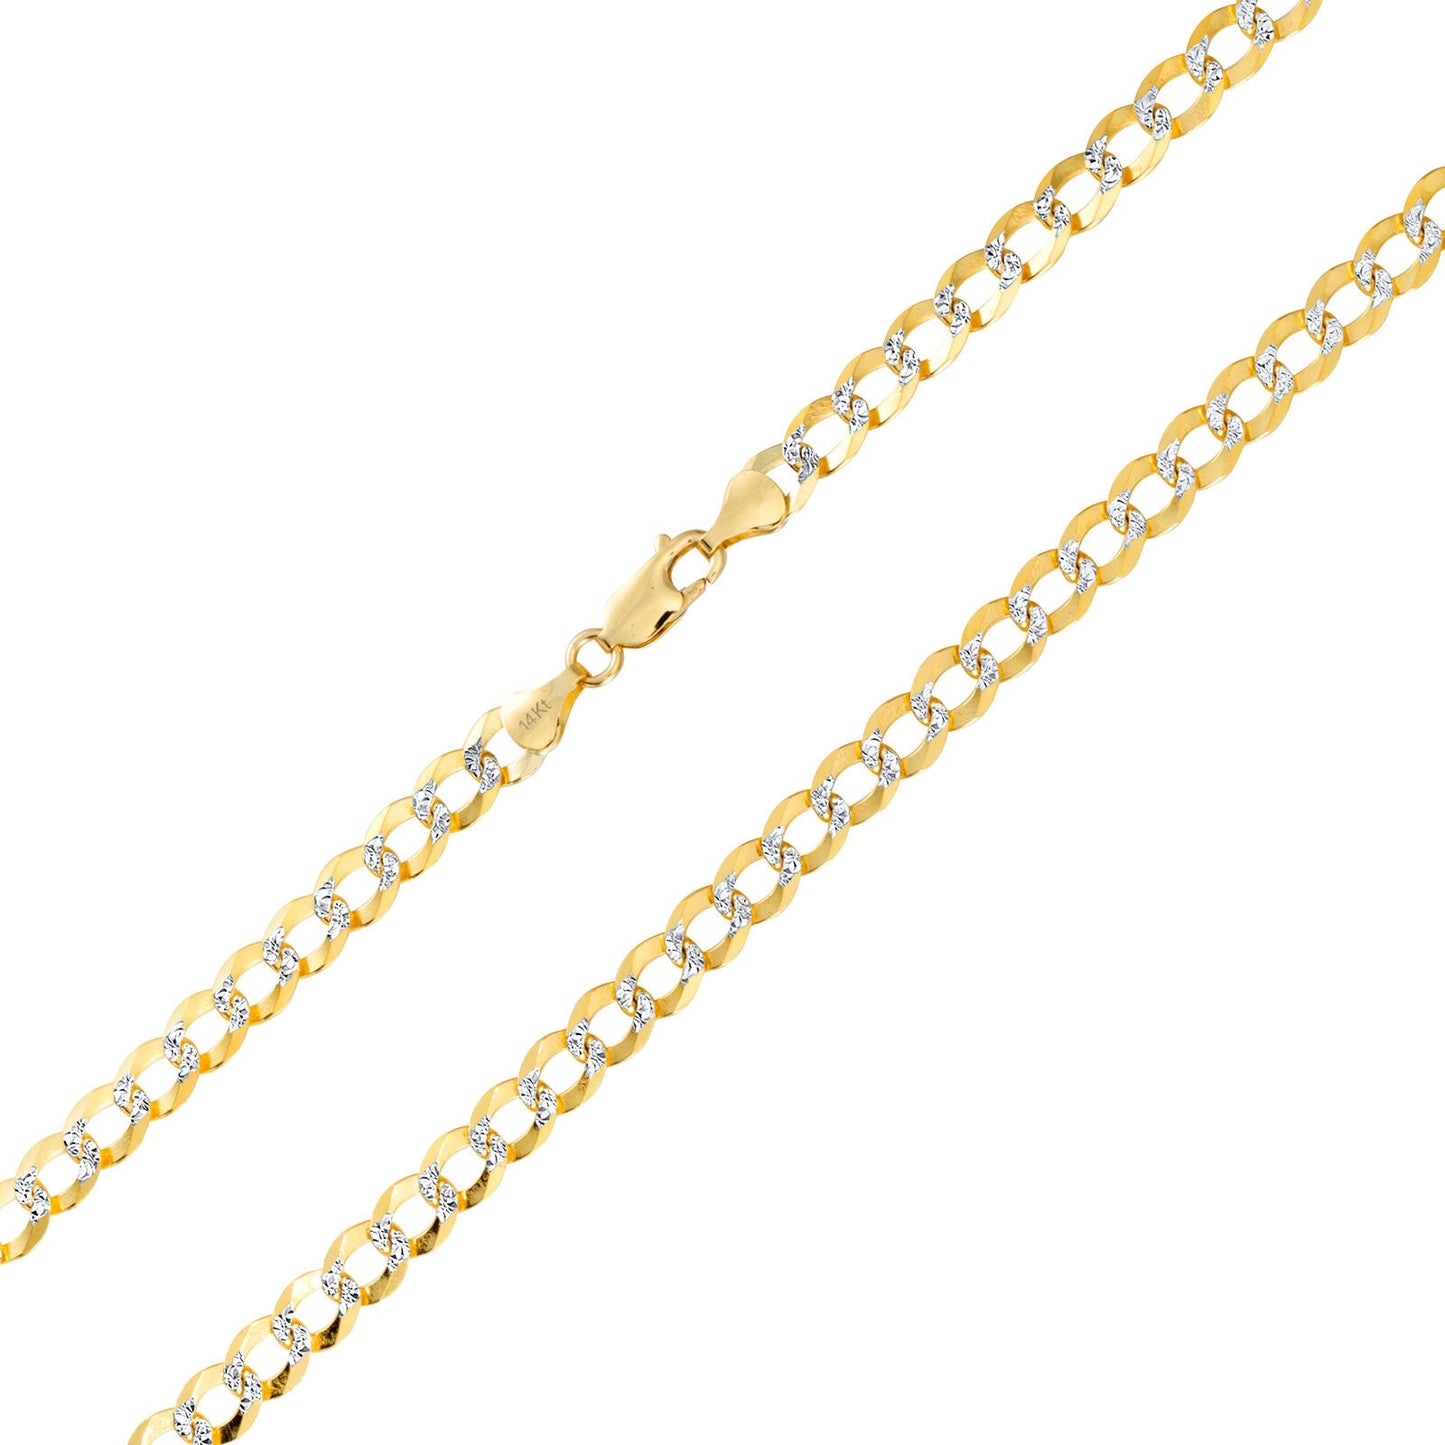 10K Solid Yellow Gold Cuban Curb Chain 12mm Diamond Cut Necklace 24'' Inches